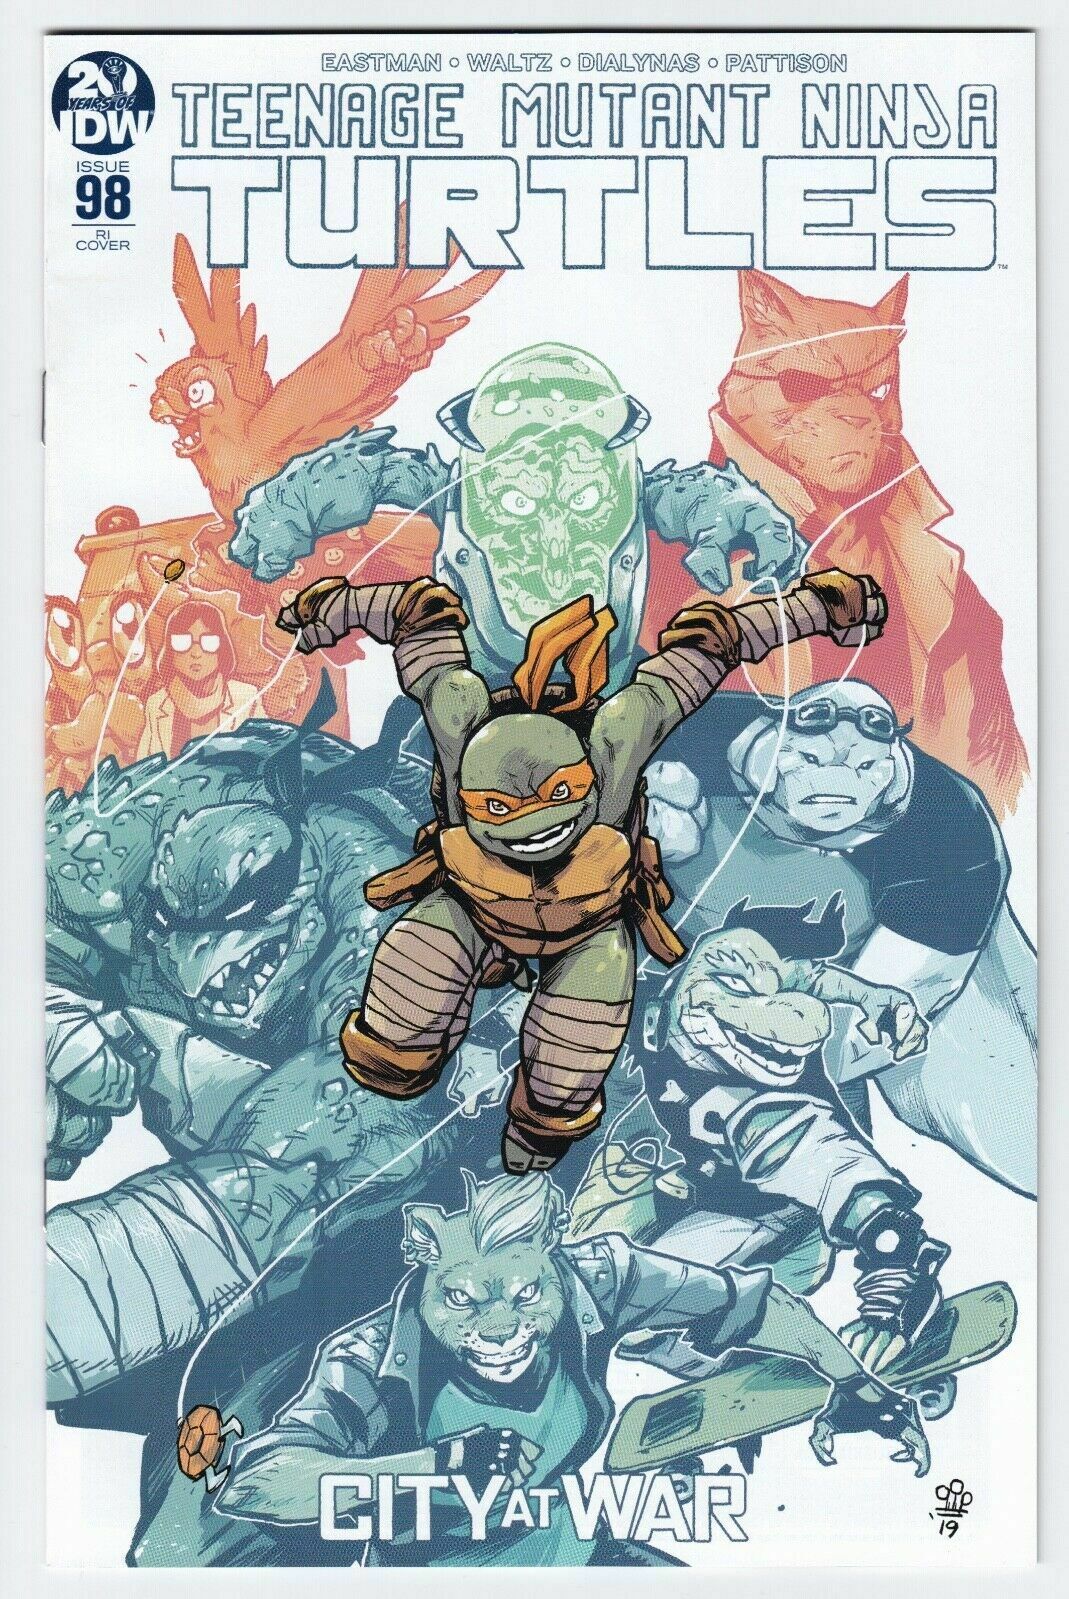 Teenage Mutant Ninja Turtles Ongoing #98 1 for 10 Incentive Dialynas (2011)